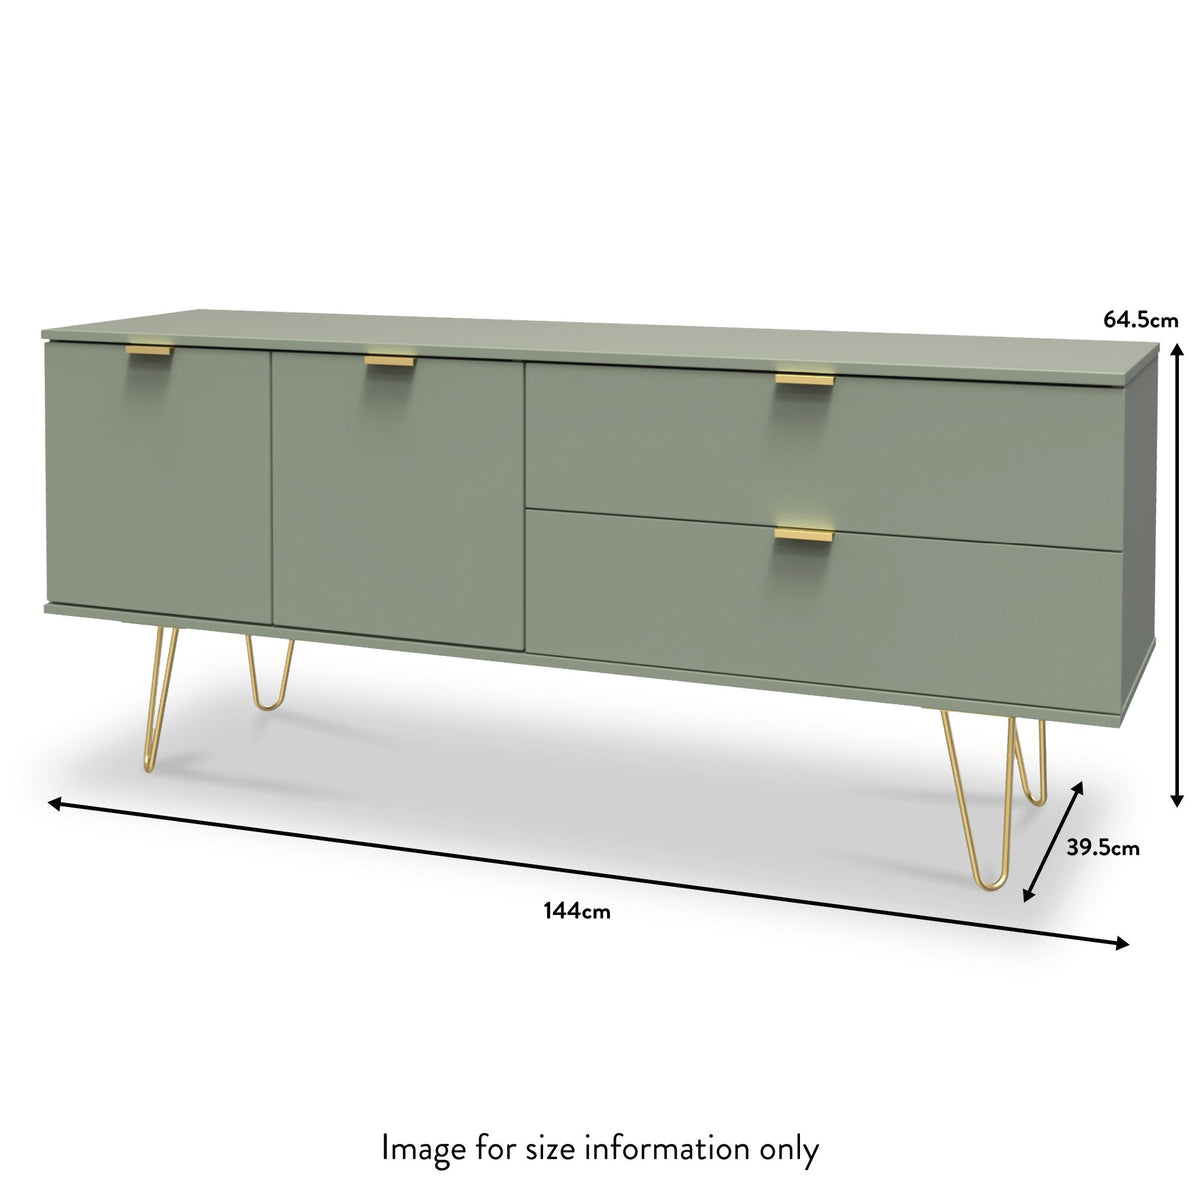 Moreno Olive Green 2 Door 2 Drawer Sideboard Cabinet with gold hairpin legs dimensions guide